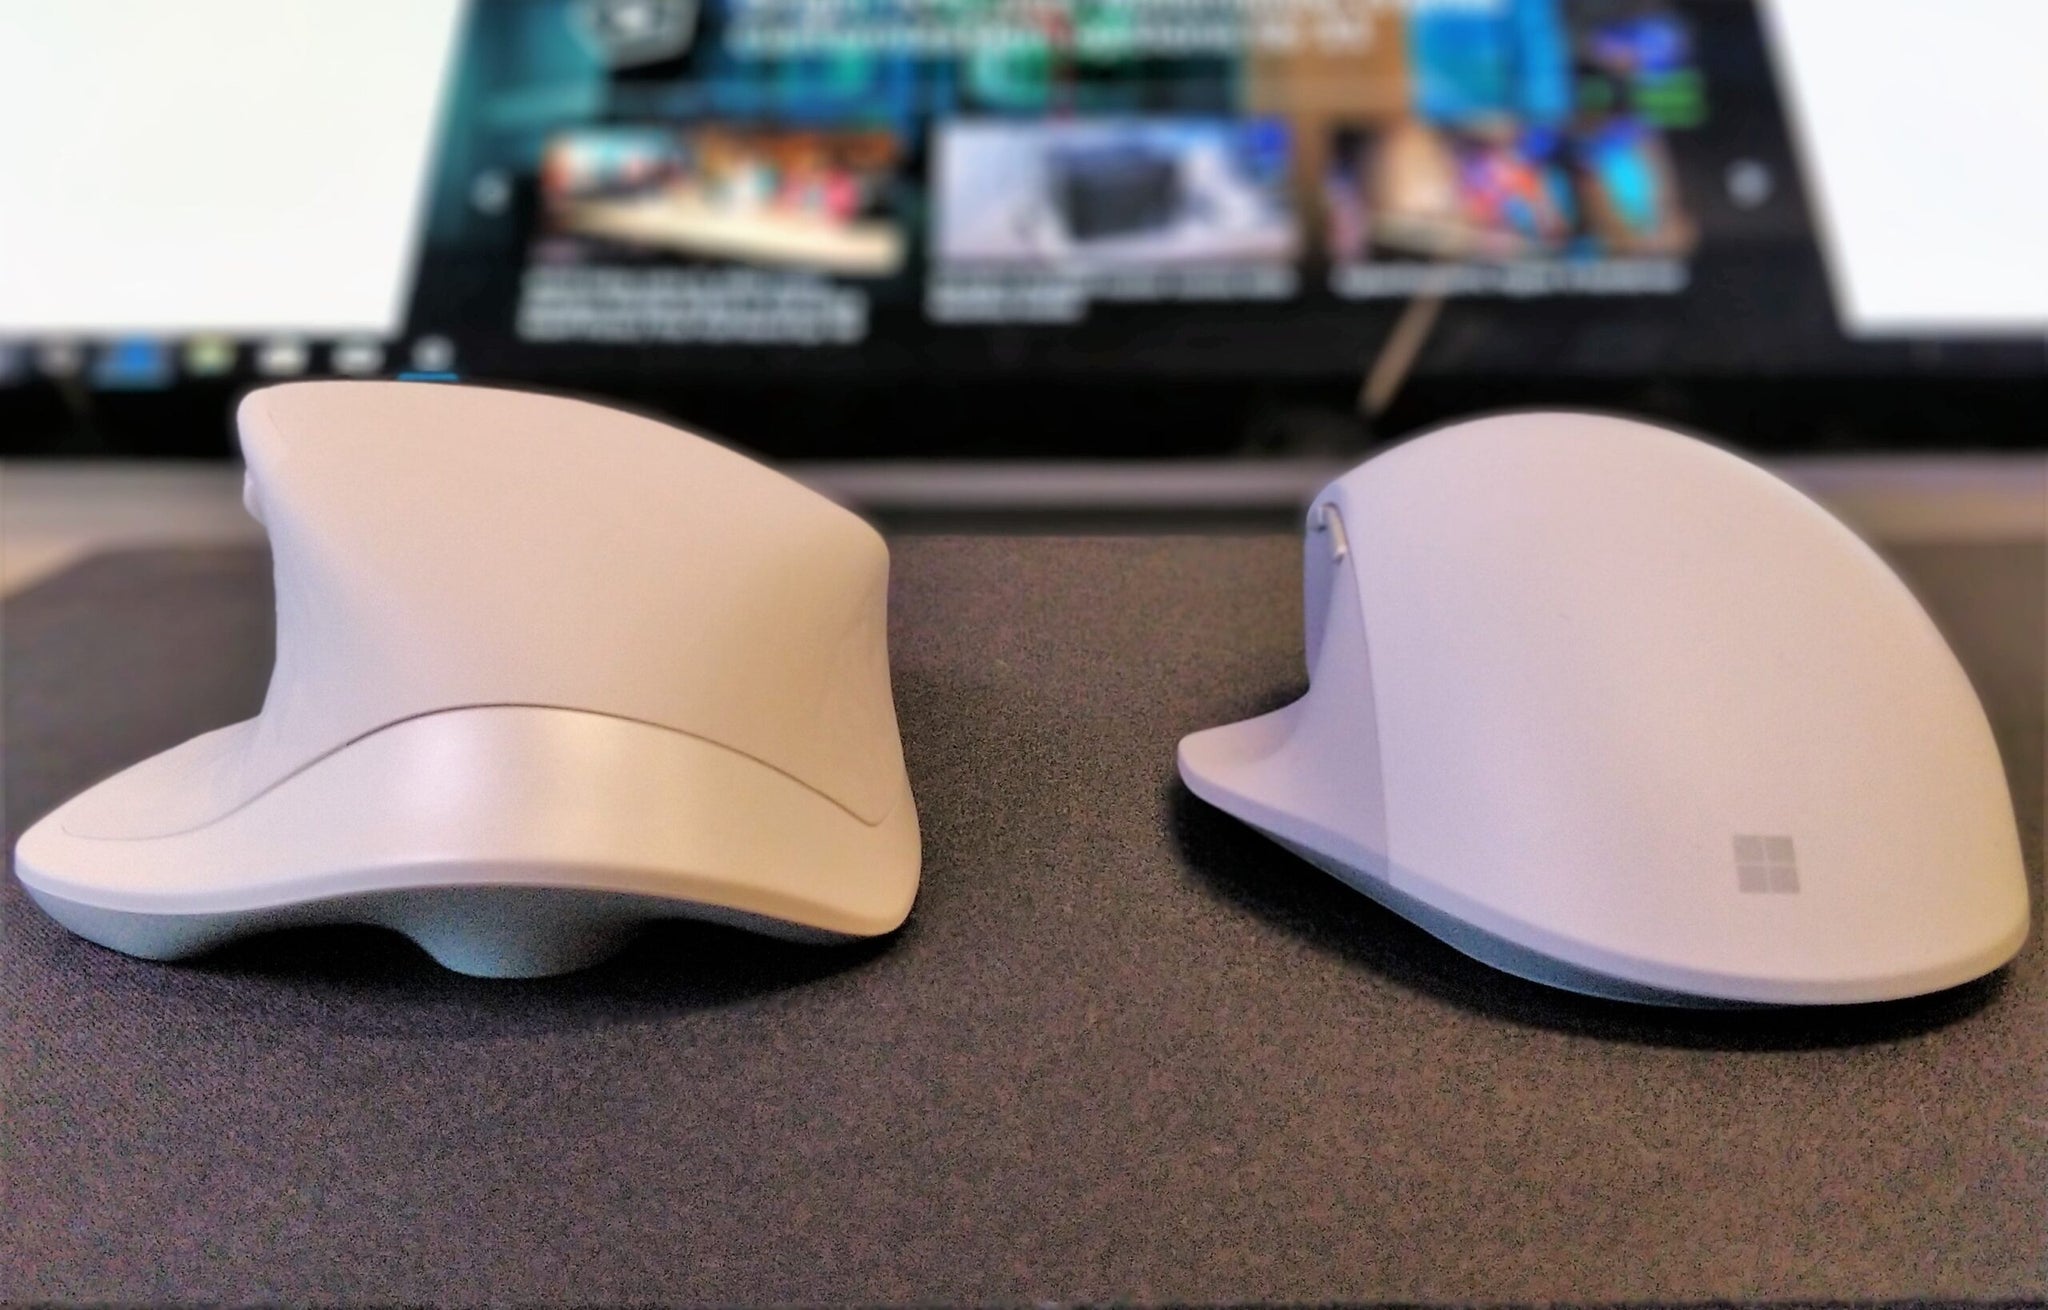 logitech mouse vs microsoft mouse: Get to Know Which is Right for You